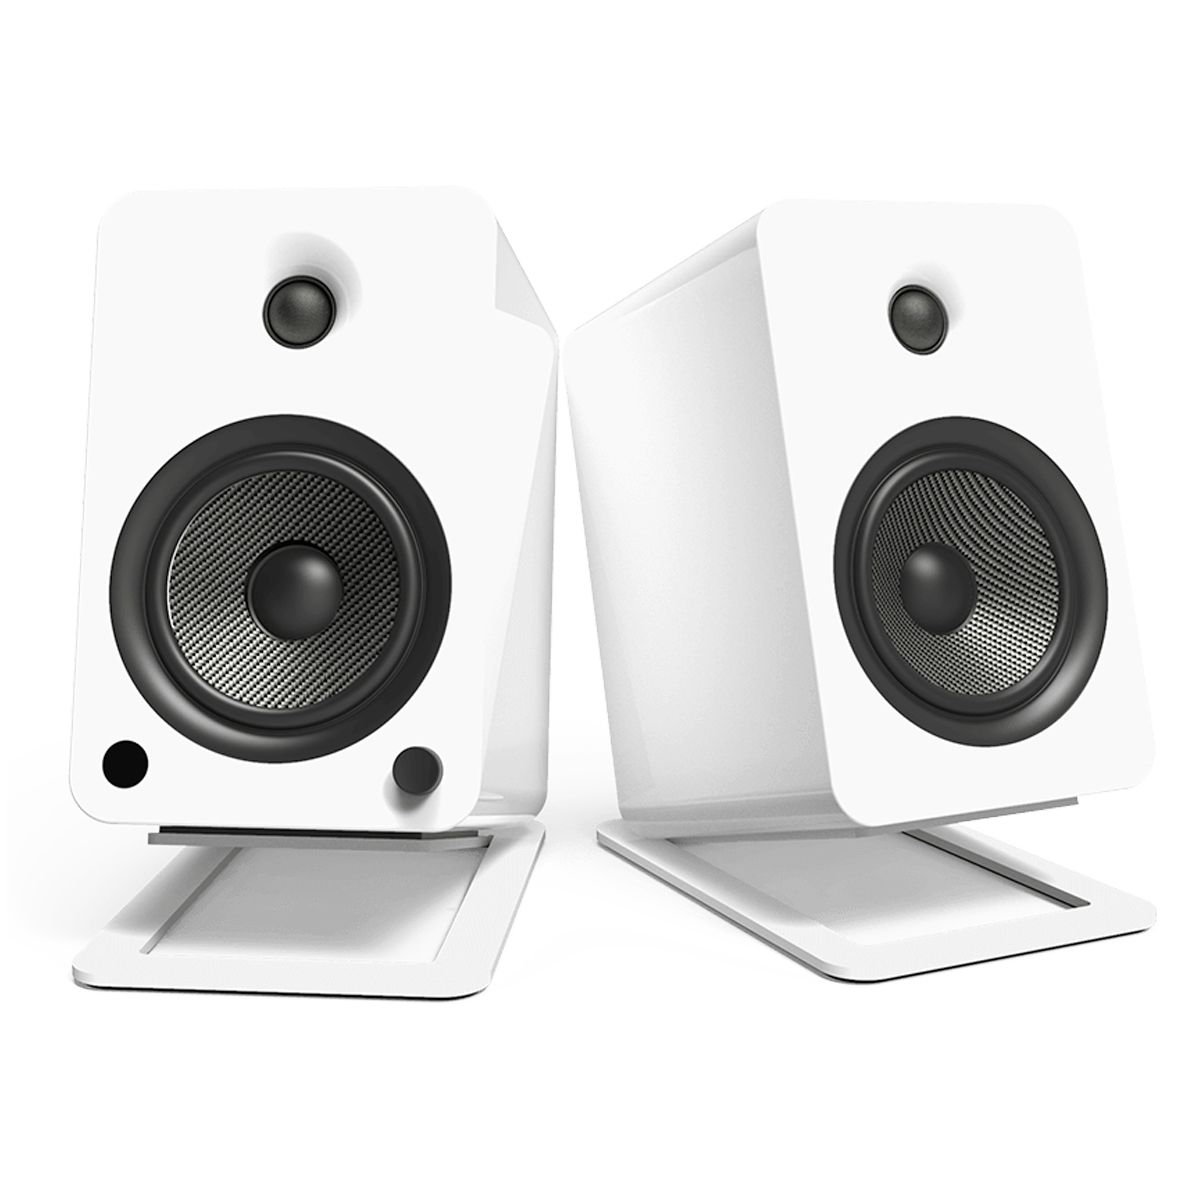 Kanto OPEN BOX S6 Desktop Speaker Stands for Large Speakers - White - Excellent Condition